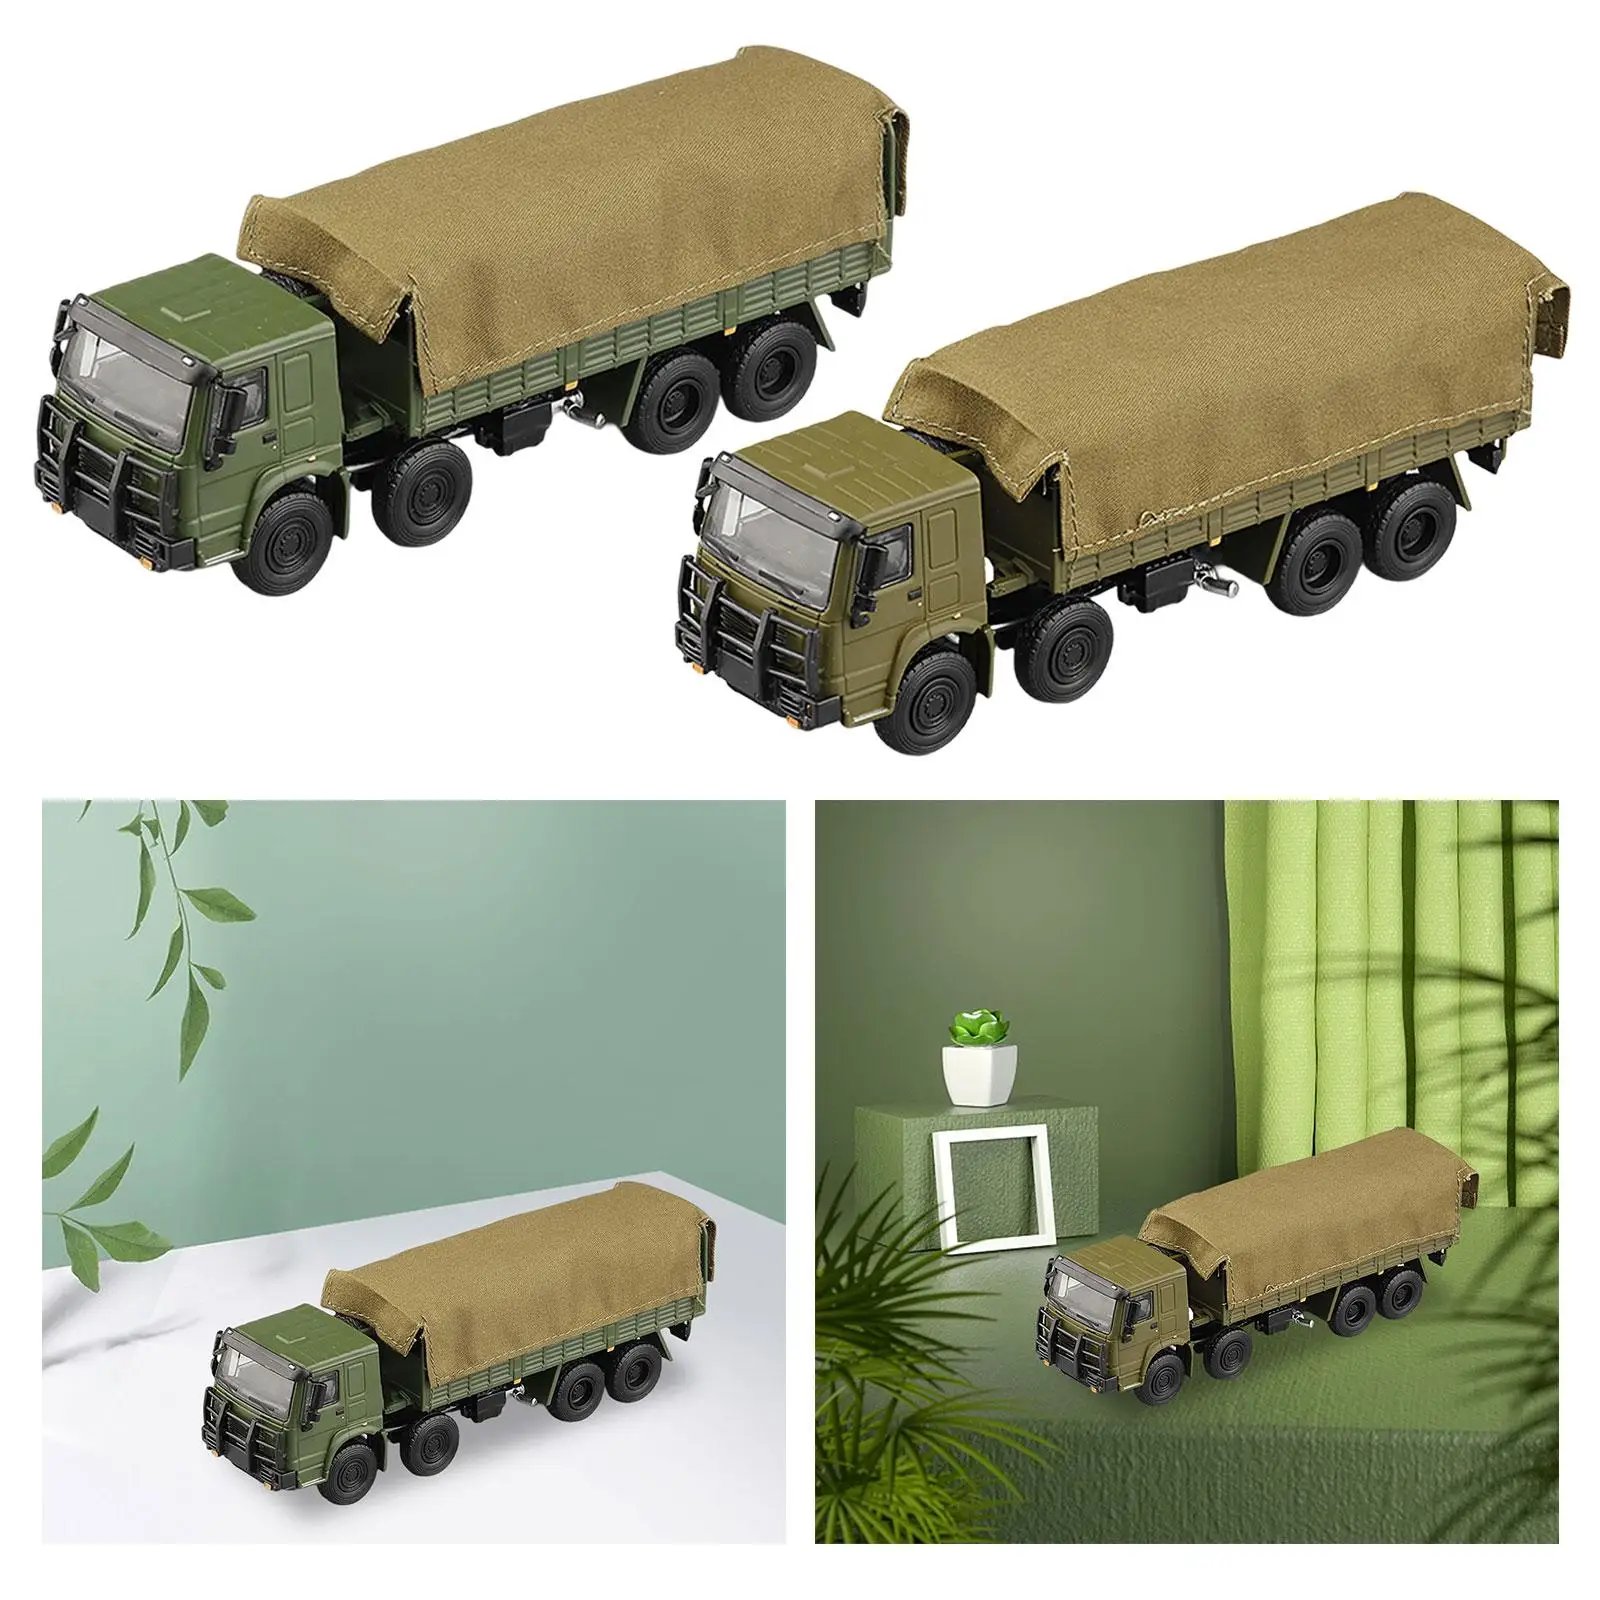 1/64 Diecast Model Car Truck Adults Gifts Diorama Scenes Sand Table Ornament Collection for Diorama Miniature Scene Decor Layout